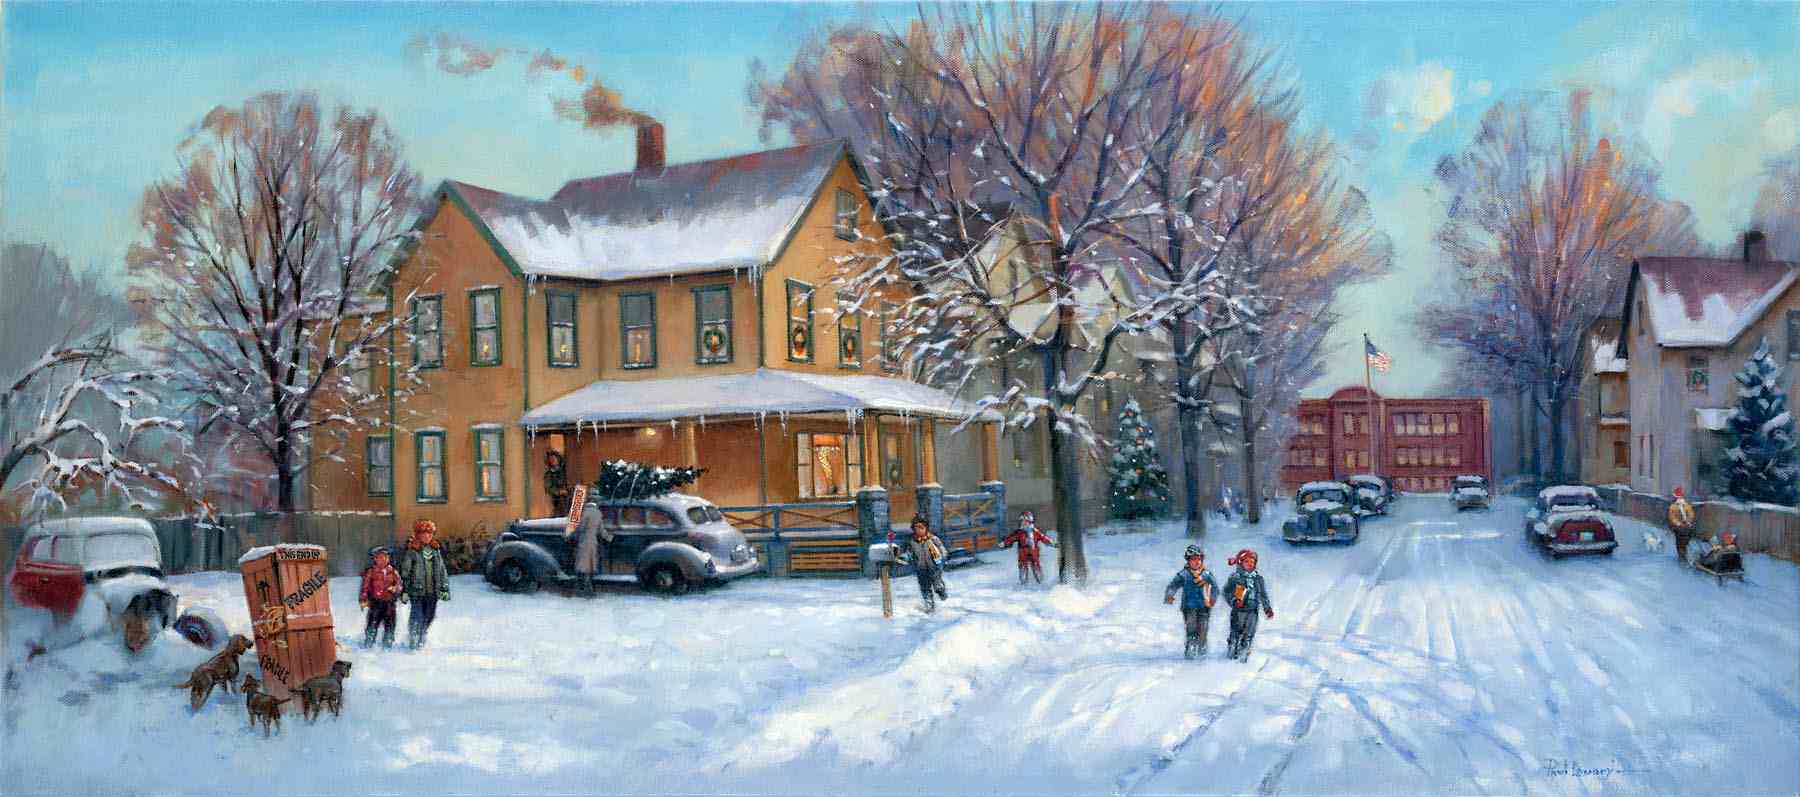 A Christmas Story by Paul Landry print or canvas available from Snow